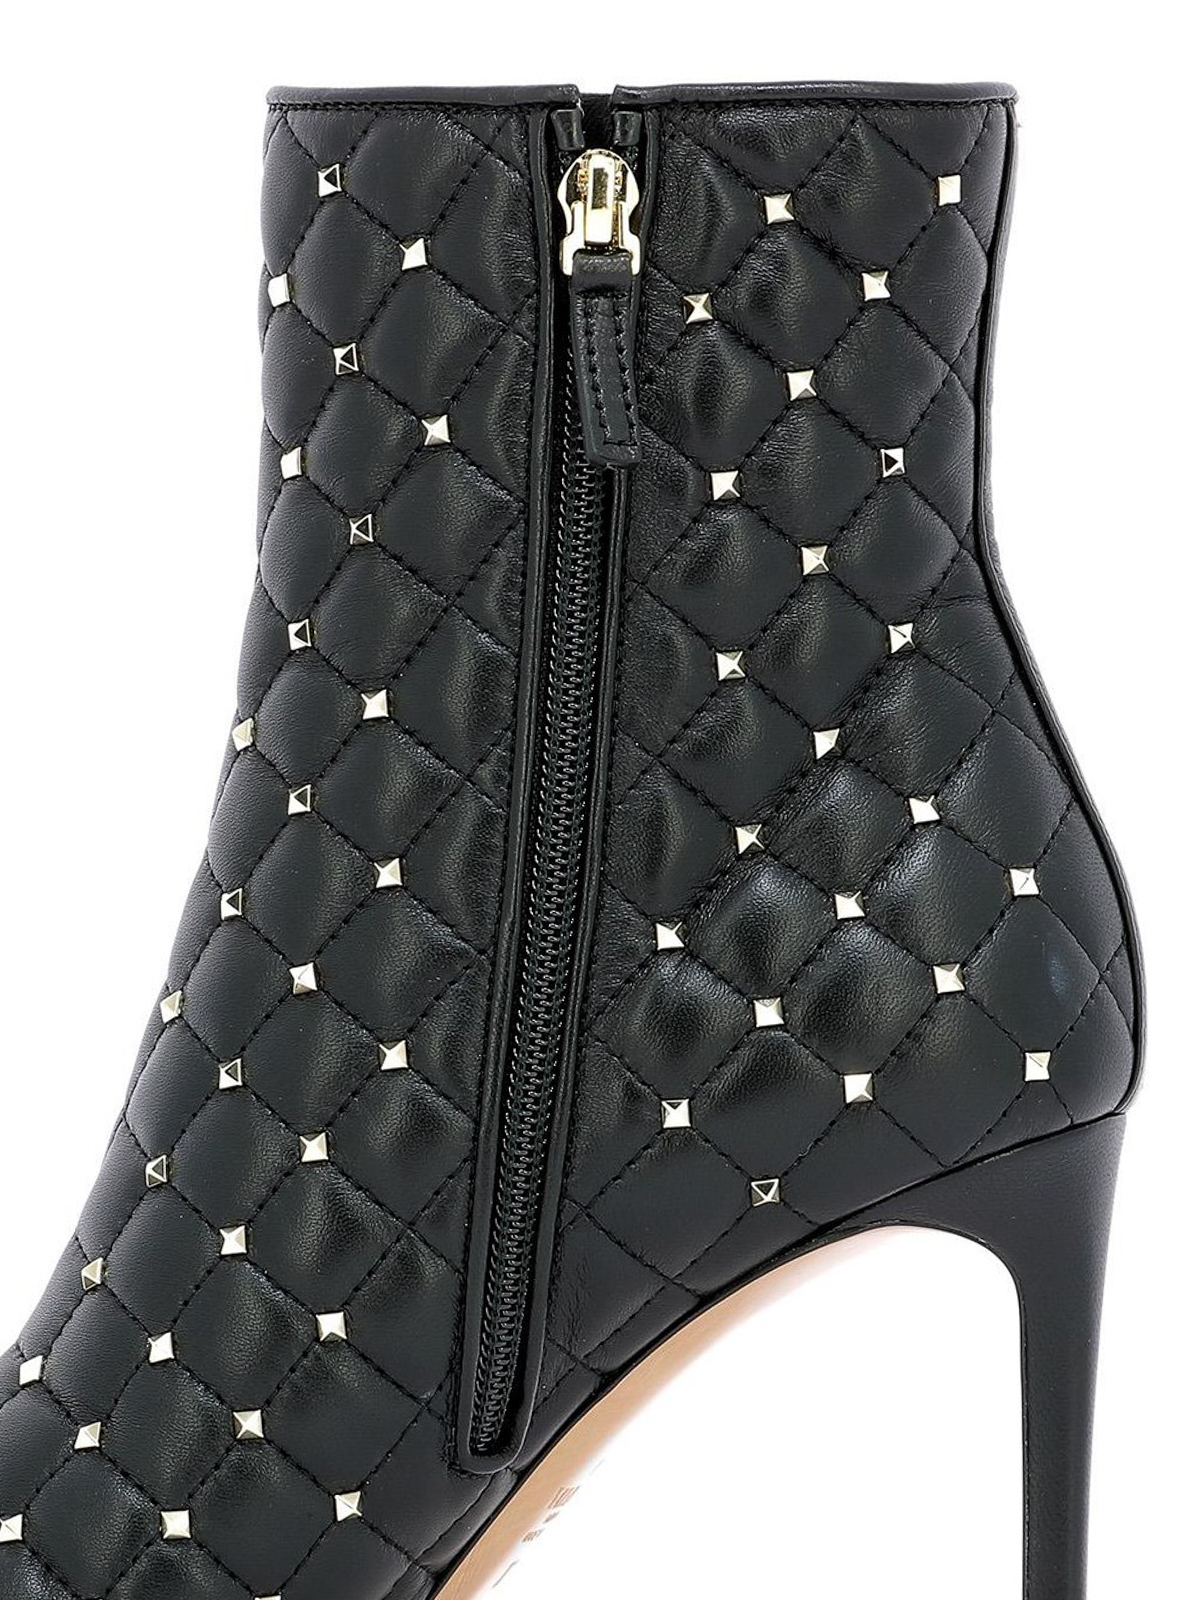 valentino spike boots